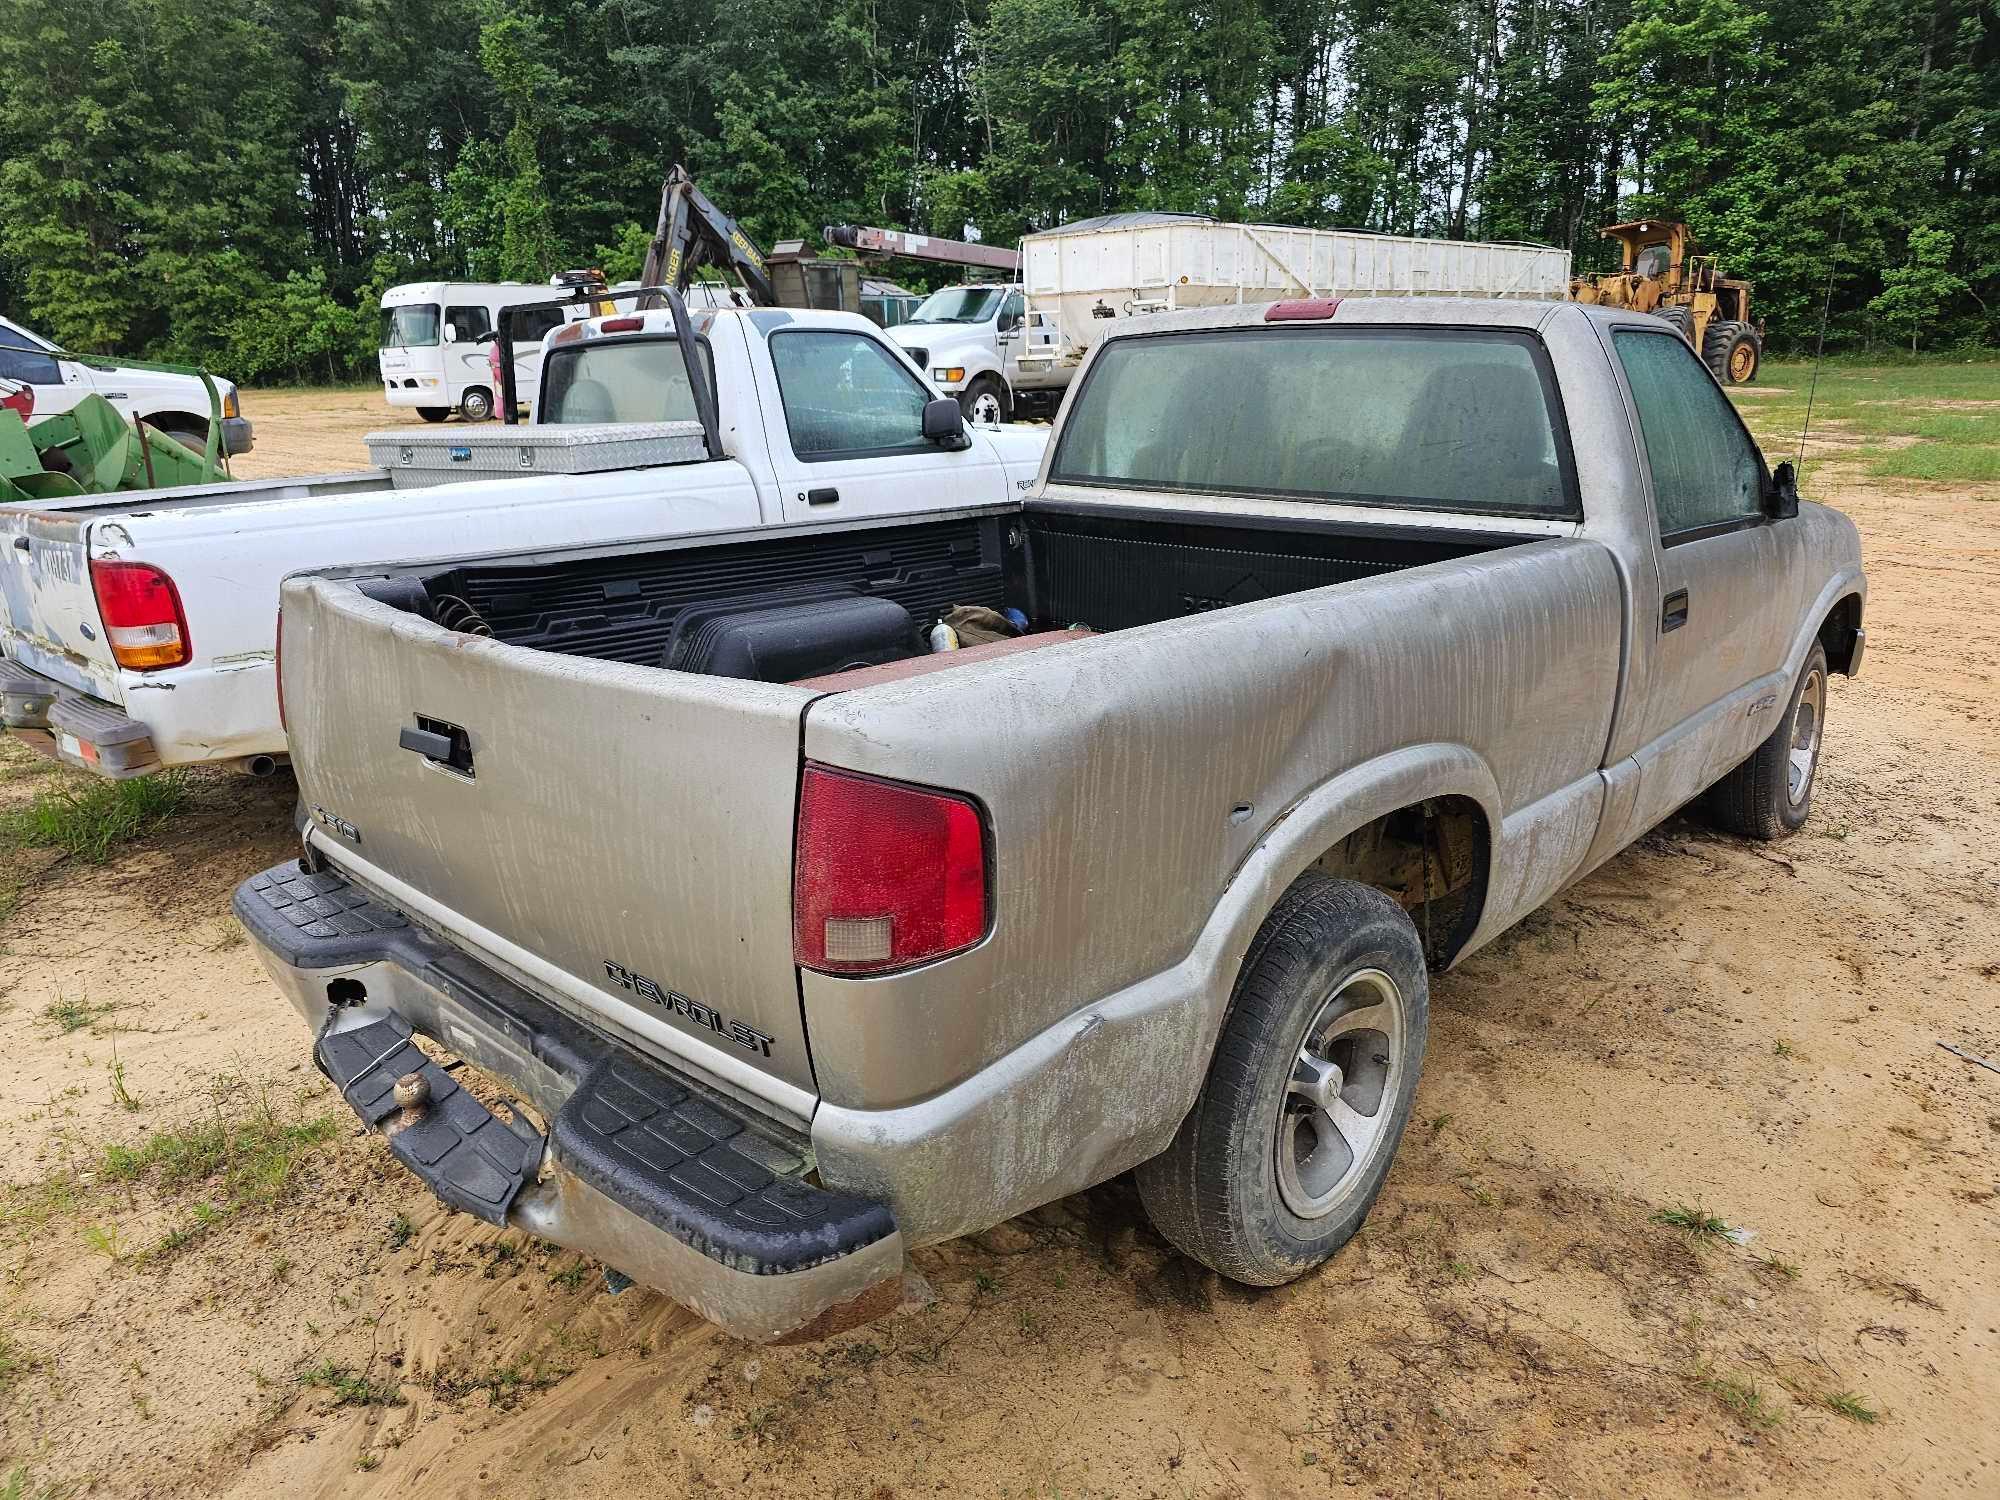 1005 - 2001 CHEVY S10 2WD TRUCK